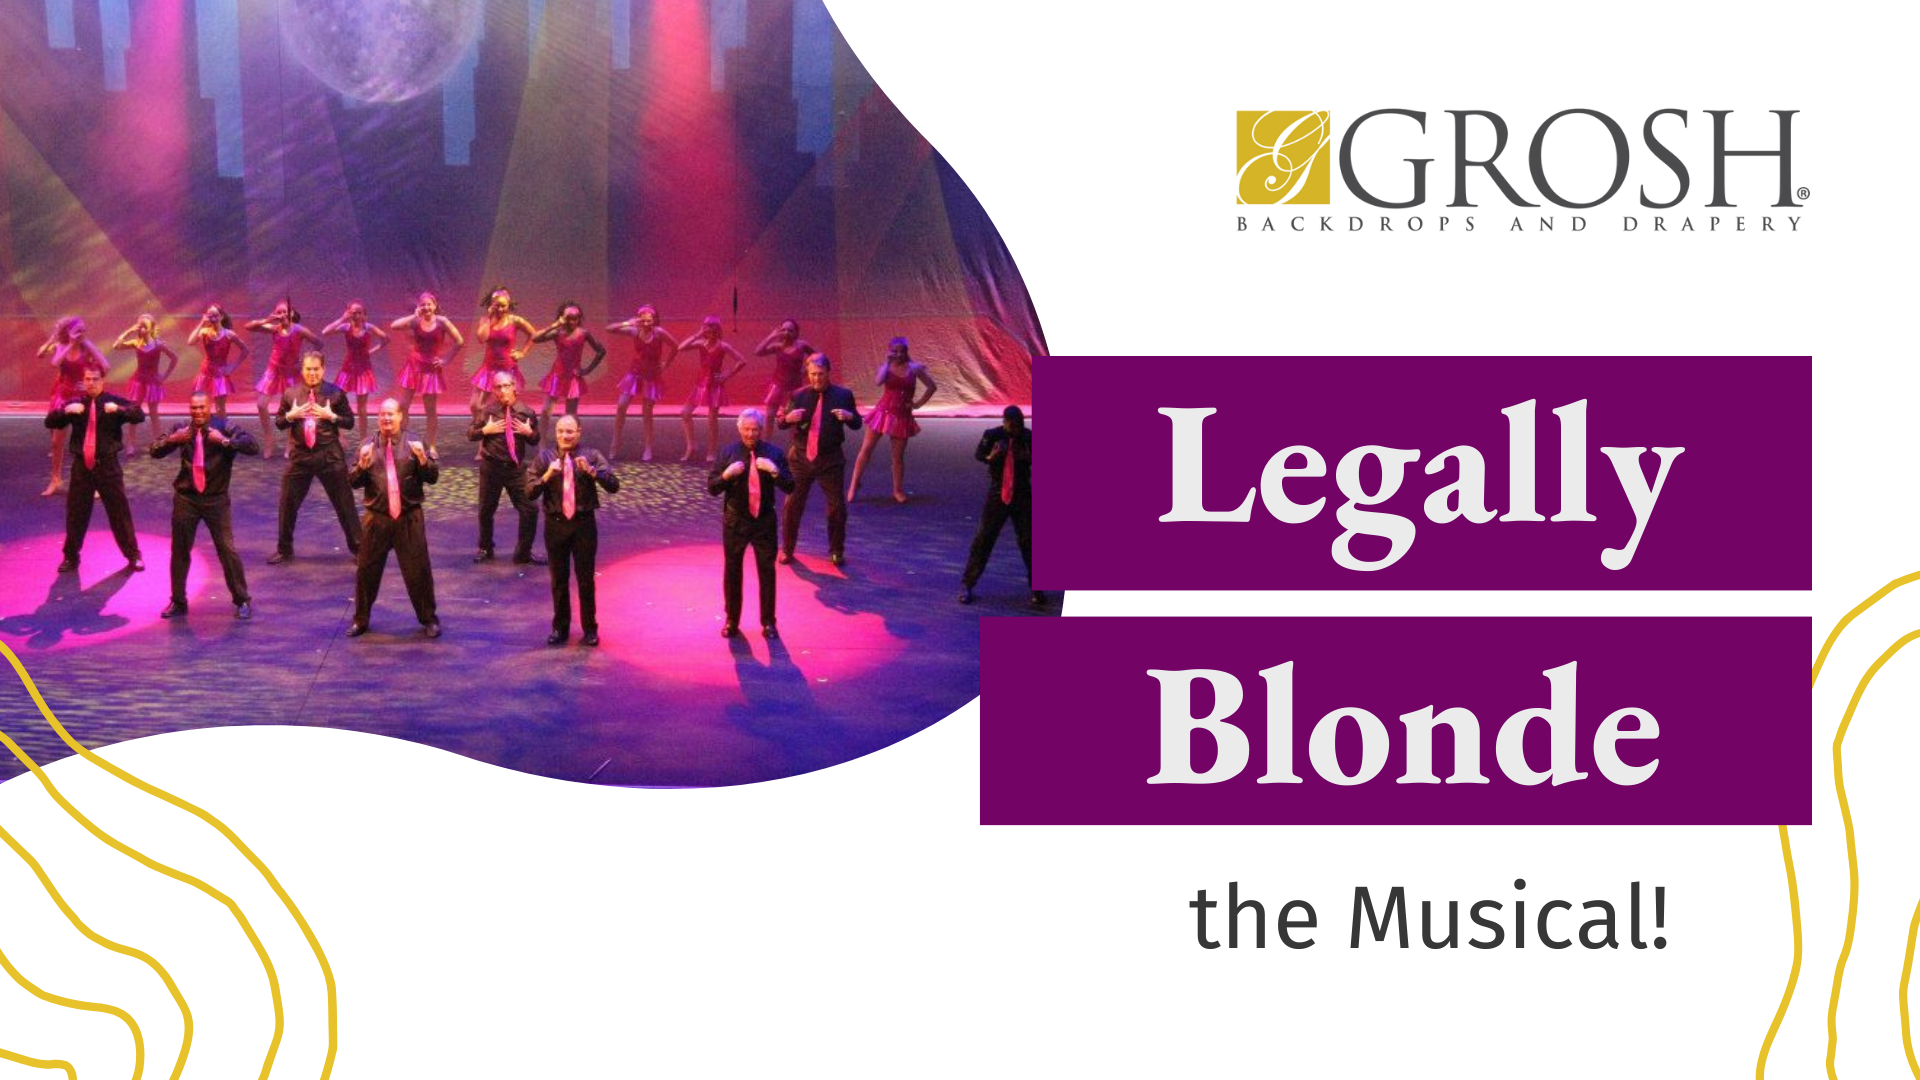 Legally Blonde the Musical!